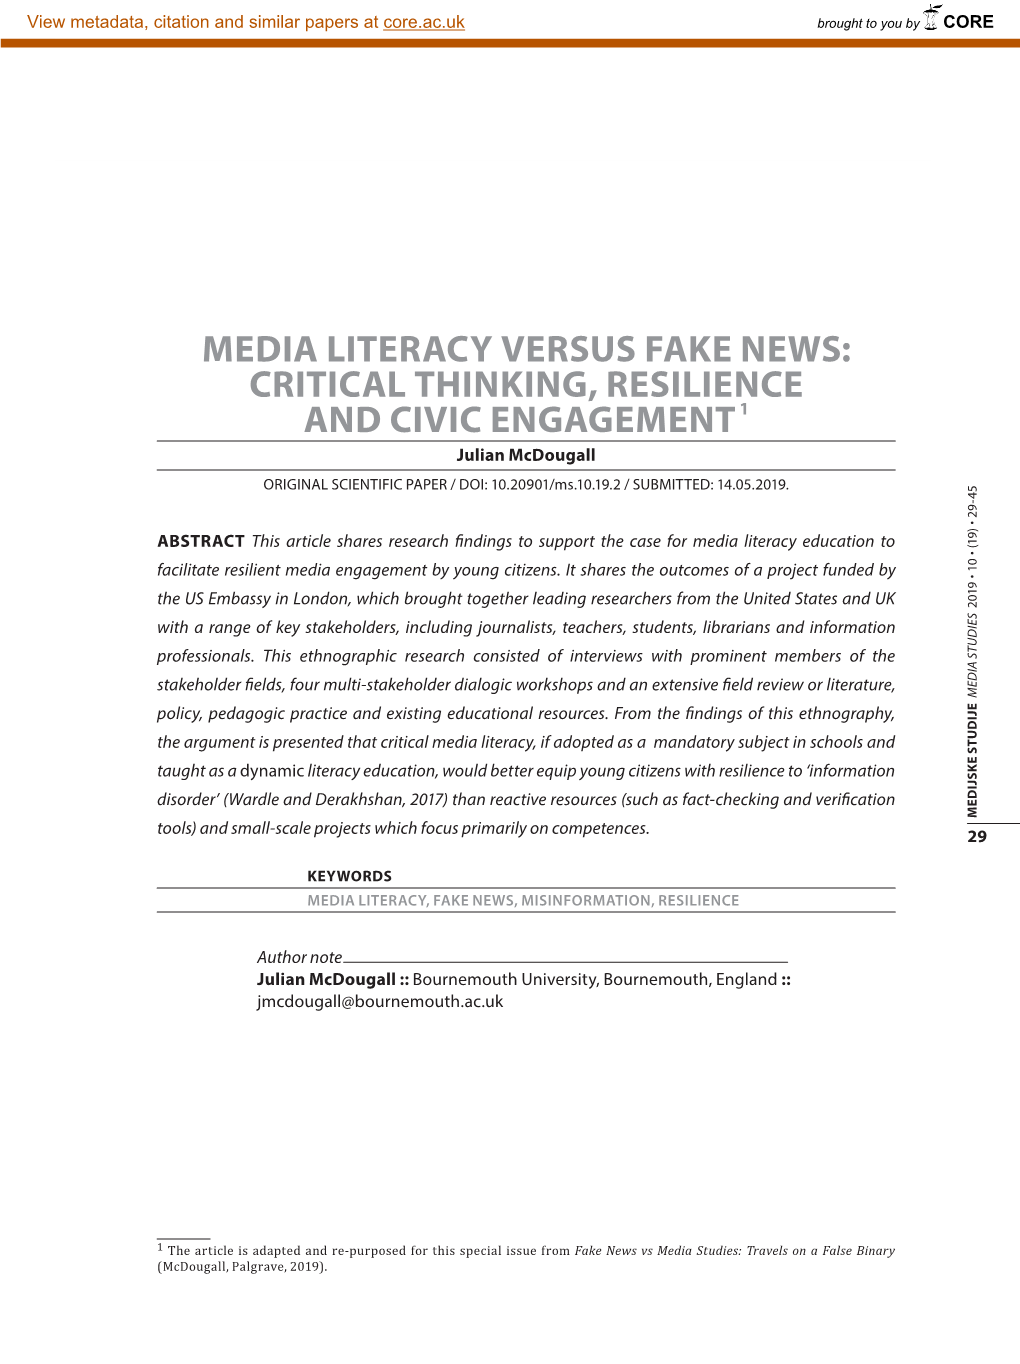 Media Literacy Versus Fake News: Critical Thinking, Resilience